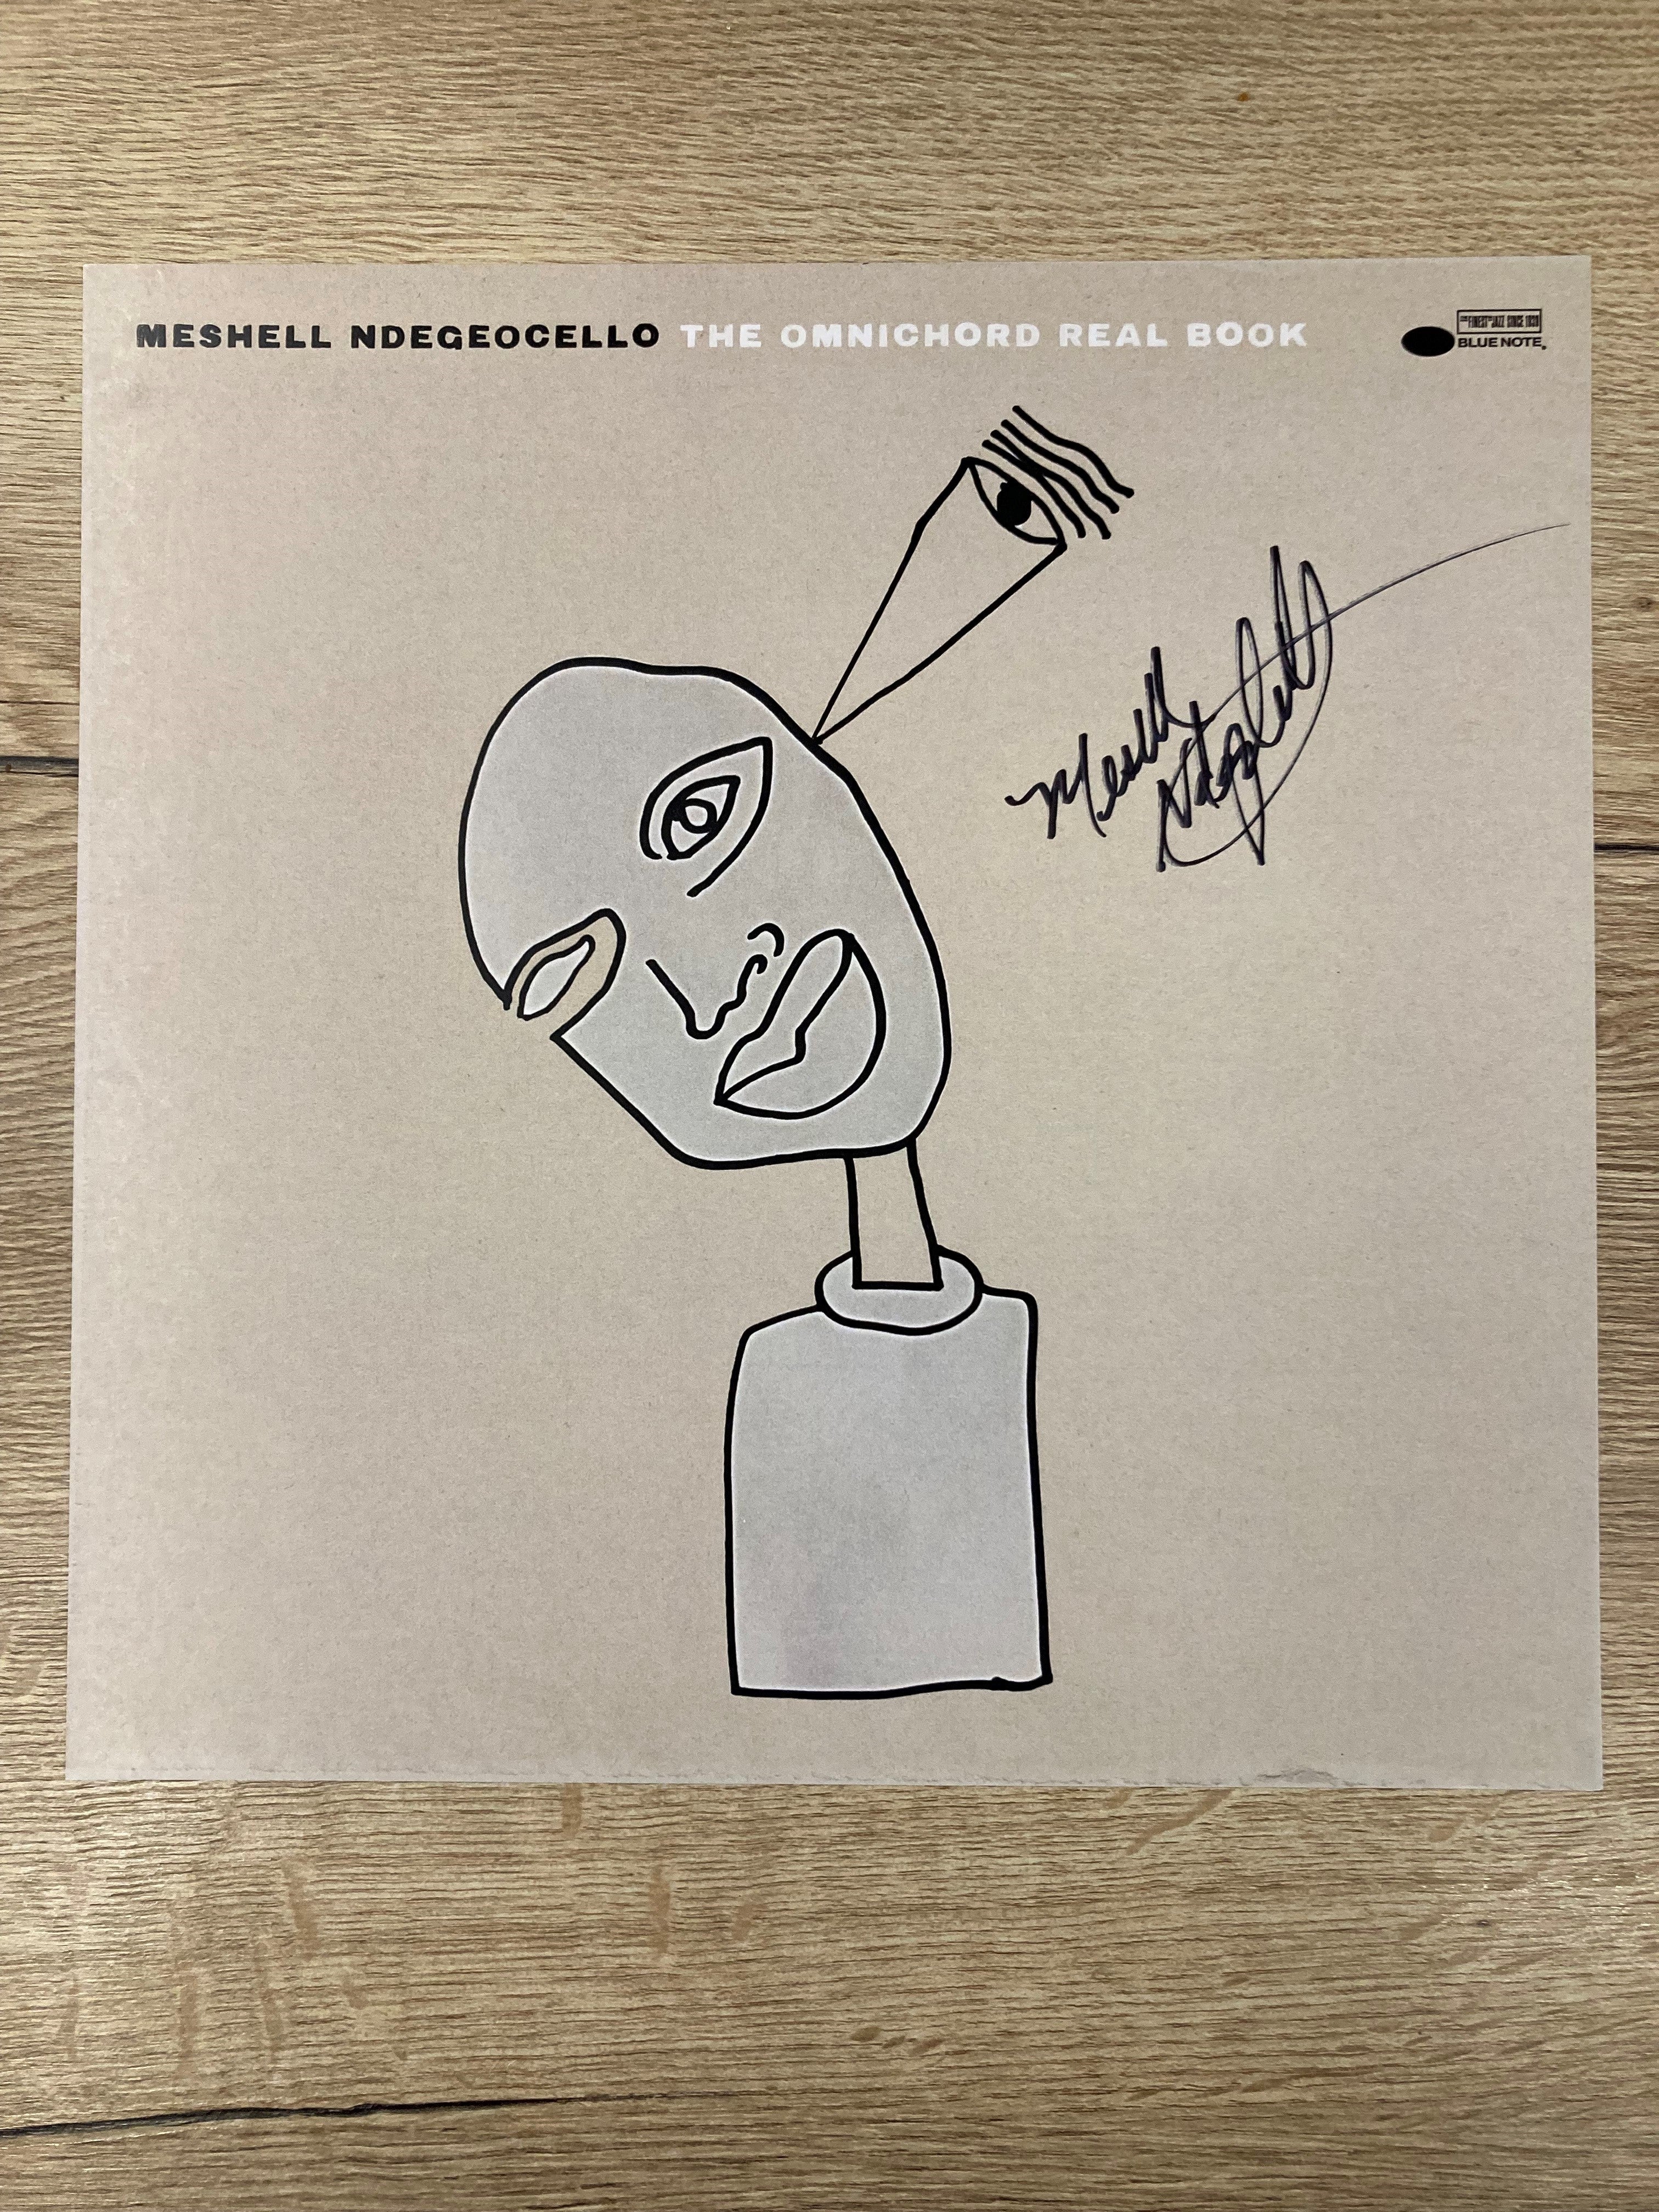 THE OMNICHORD REAL BOOK: VINYL LP + SIGNED PRINT